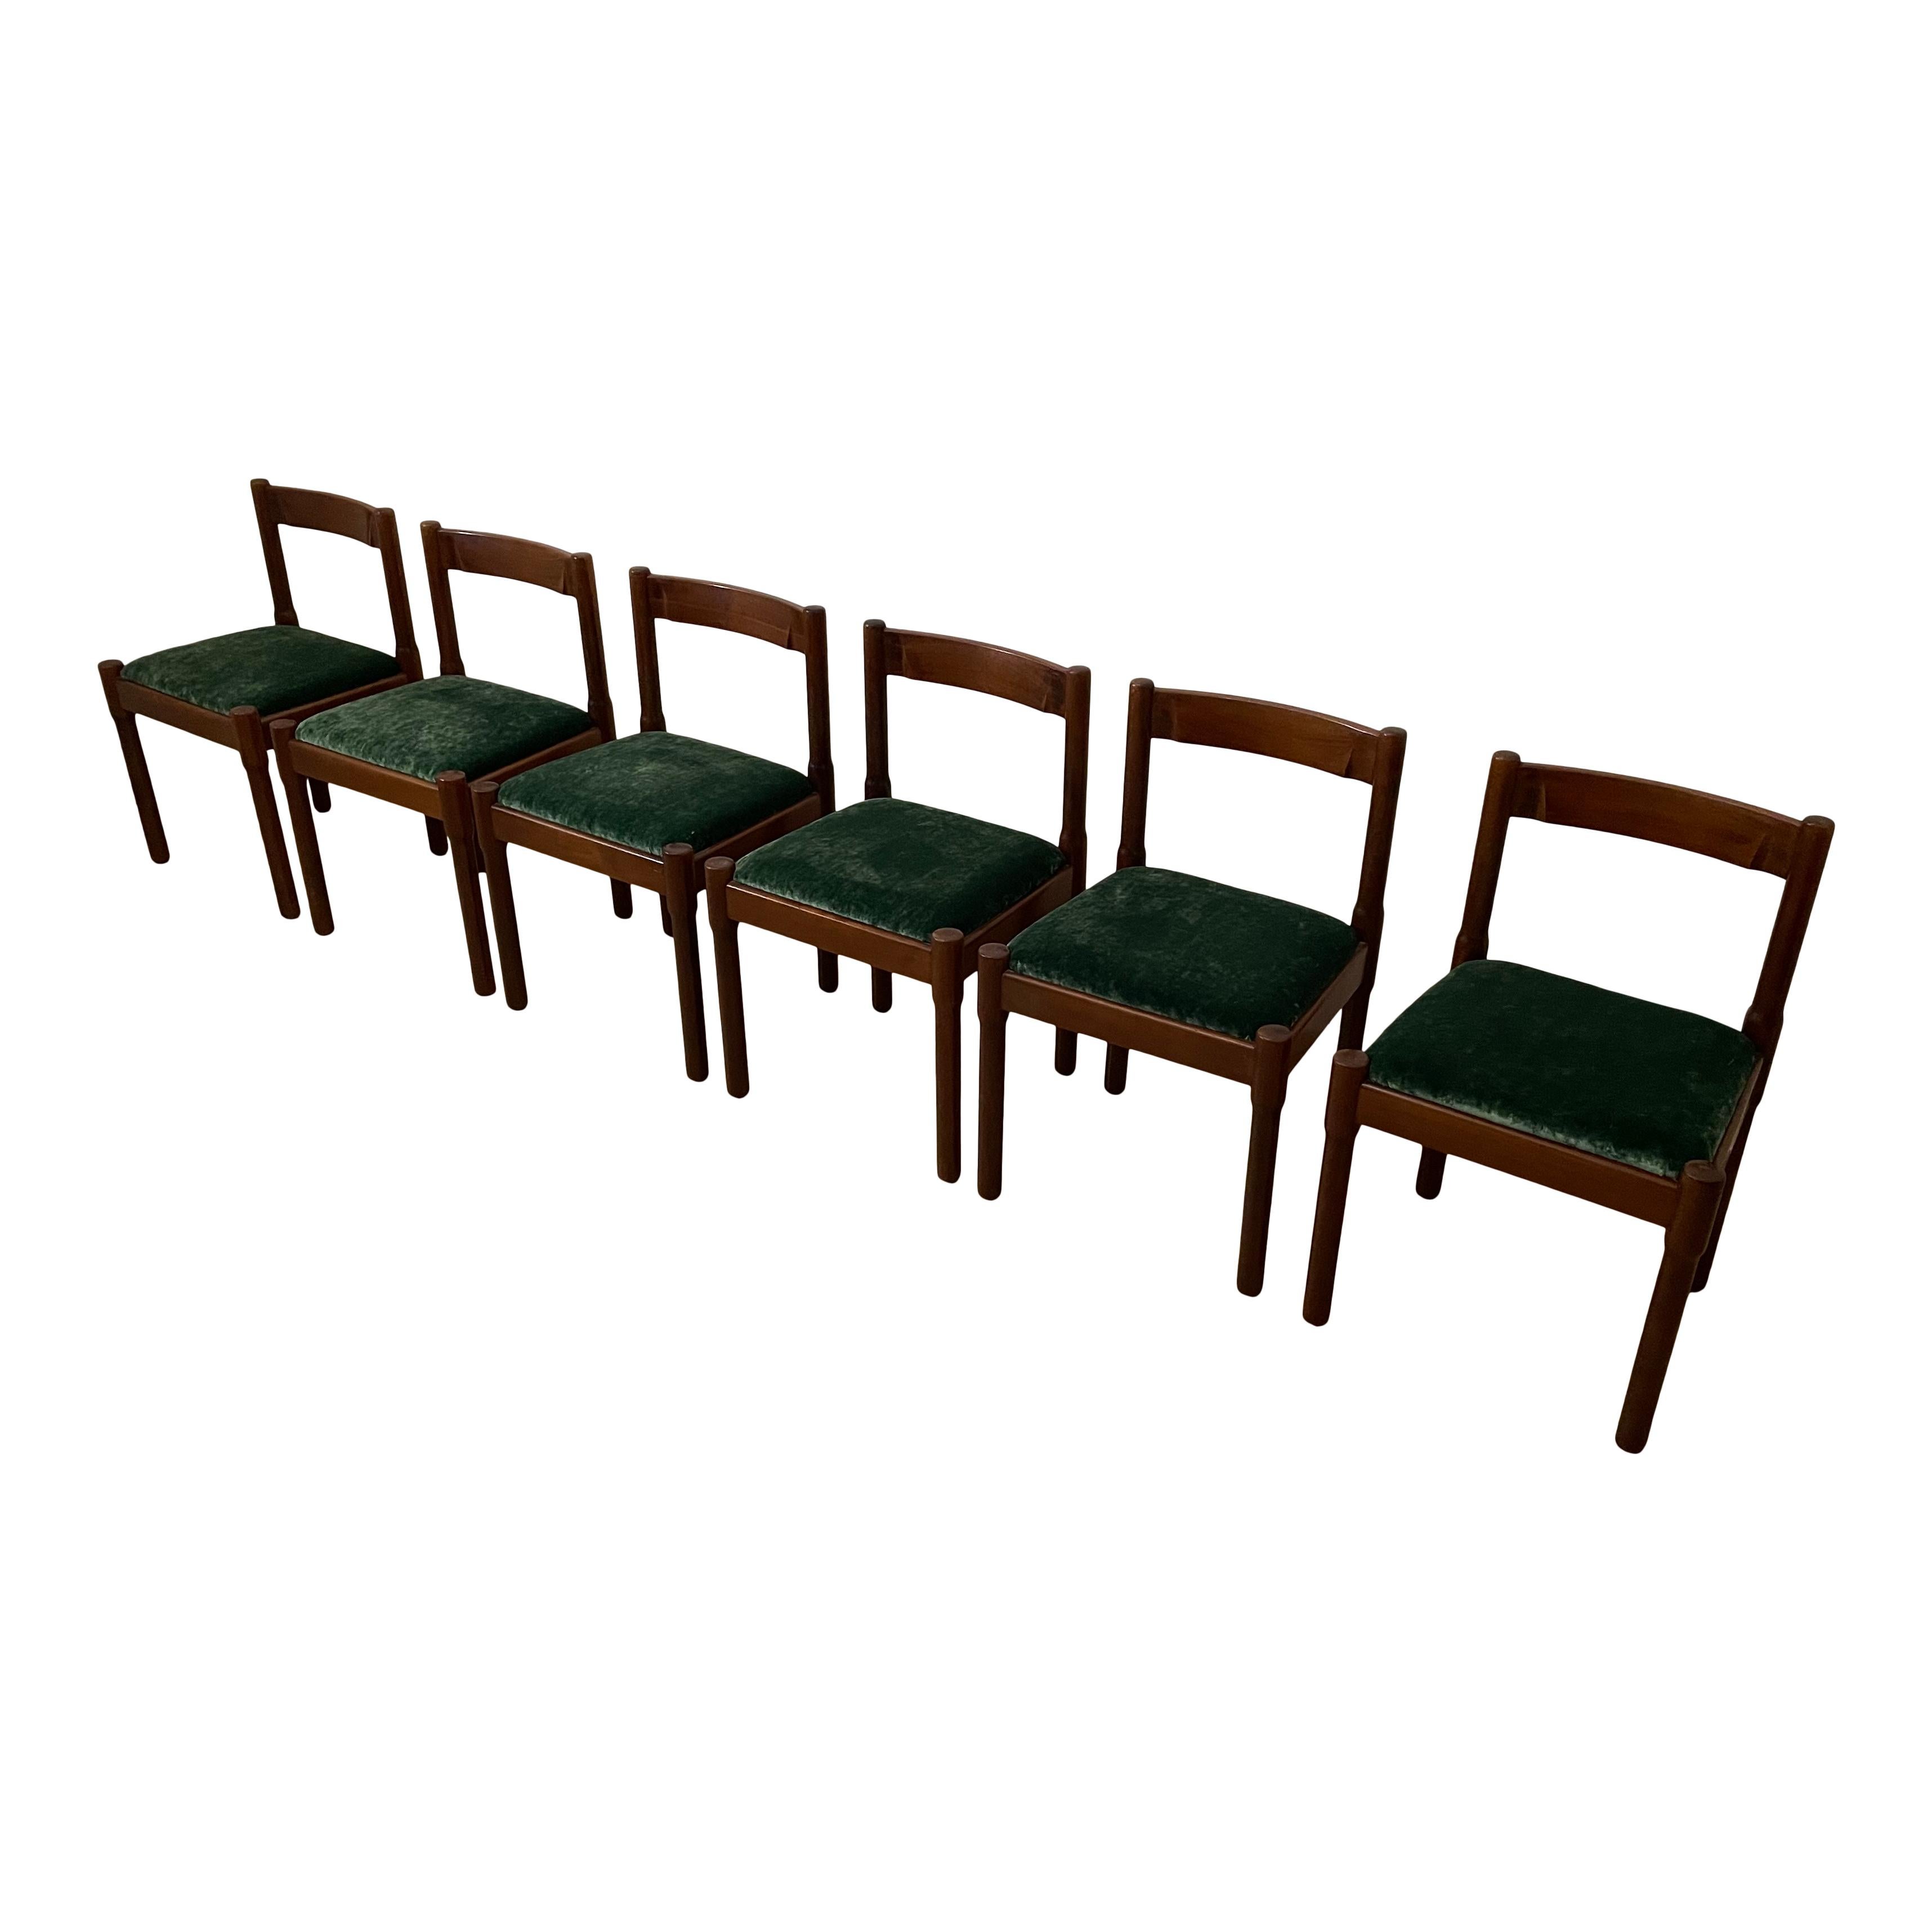 Italian Vico Magistretti Midcentury “Carimate” Dining Chair for Cassina, 1963, Set of 10 For Sale